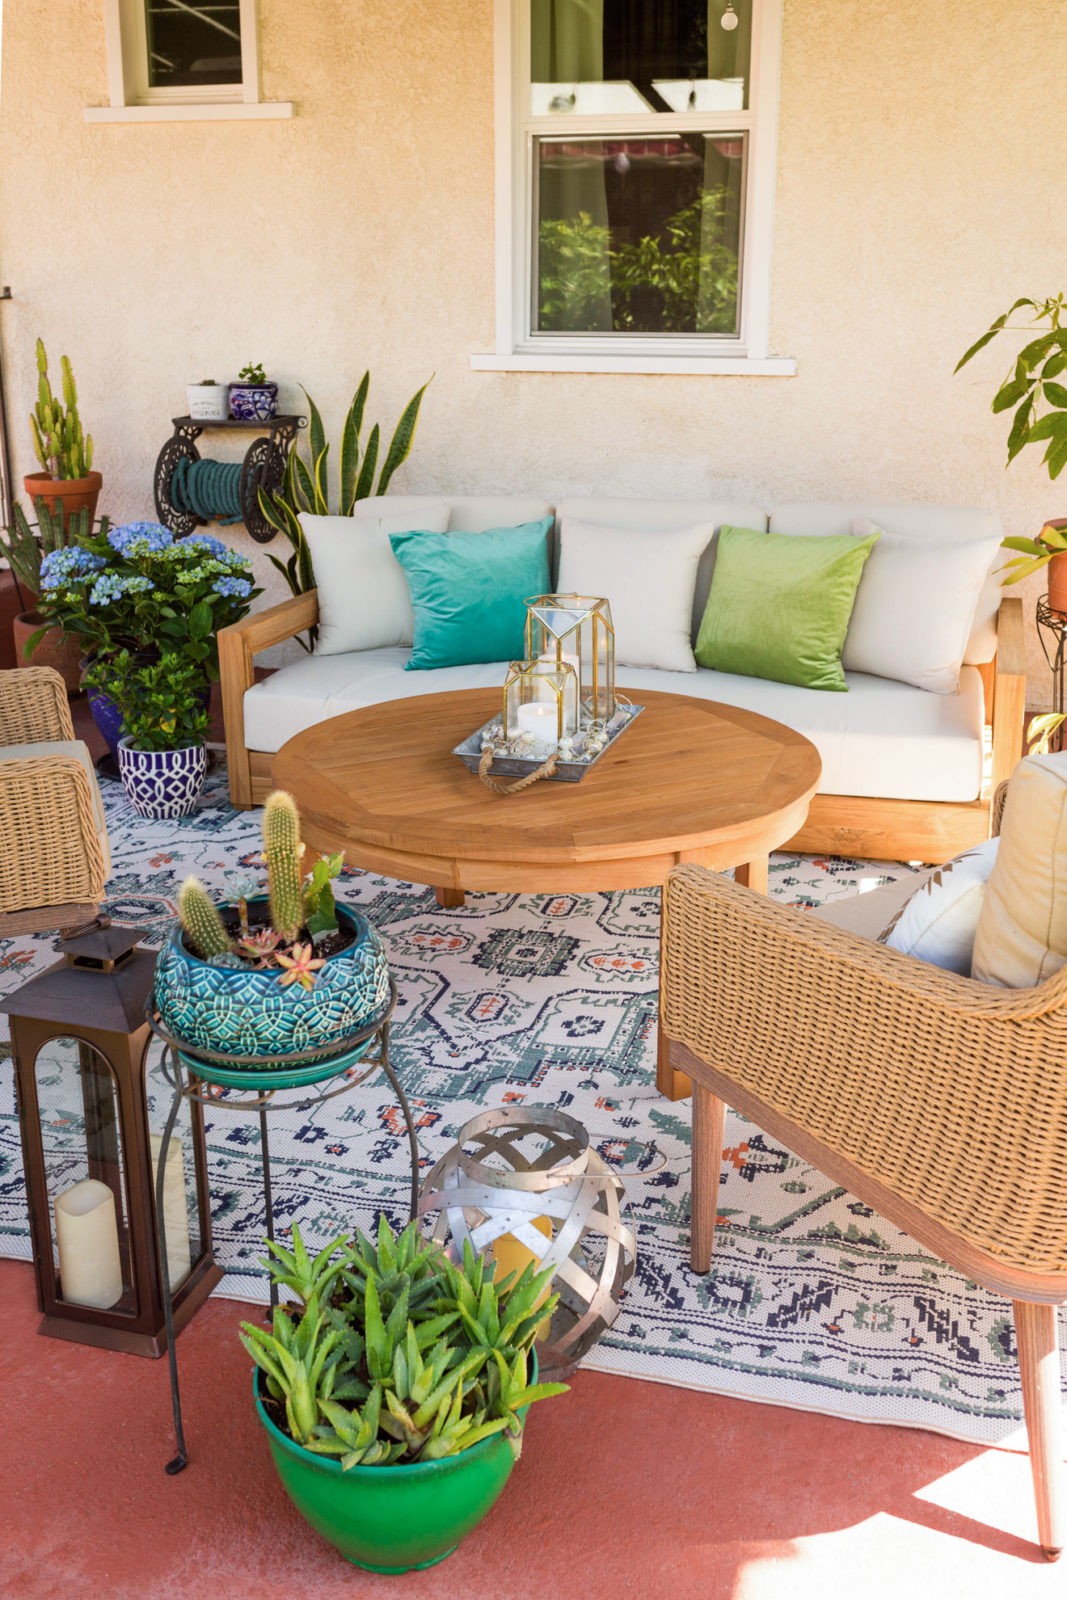 5 Decorations That You Need For Your Summer Soiree,Patio Decor Ideas with Bed Bath & Beyond by Home Decor Blogger Laura Lily, Patio Planter Ideas,